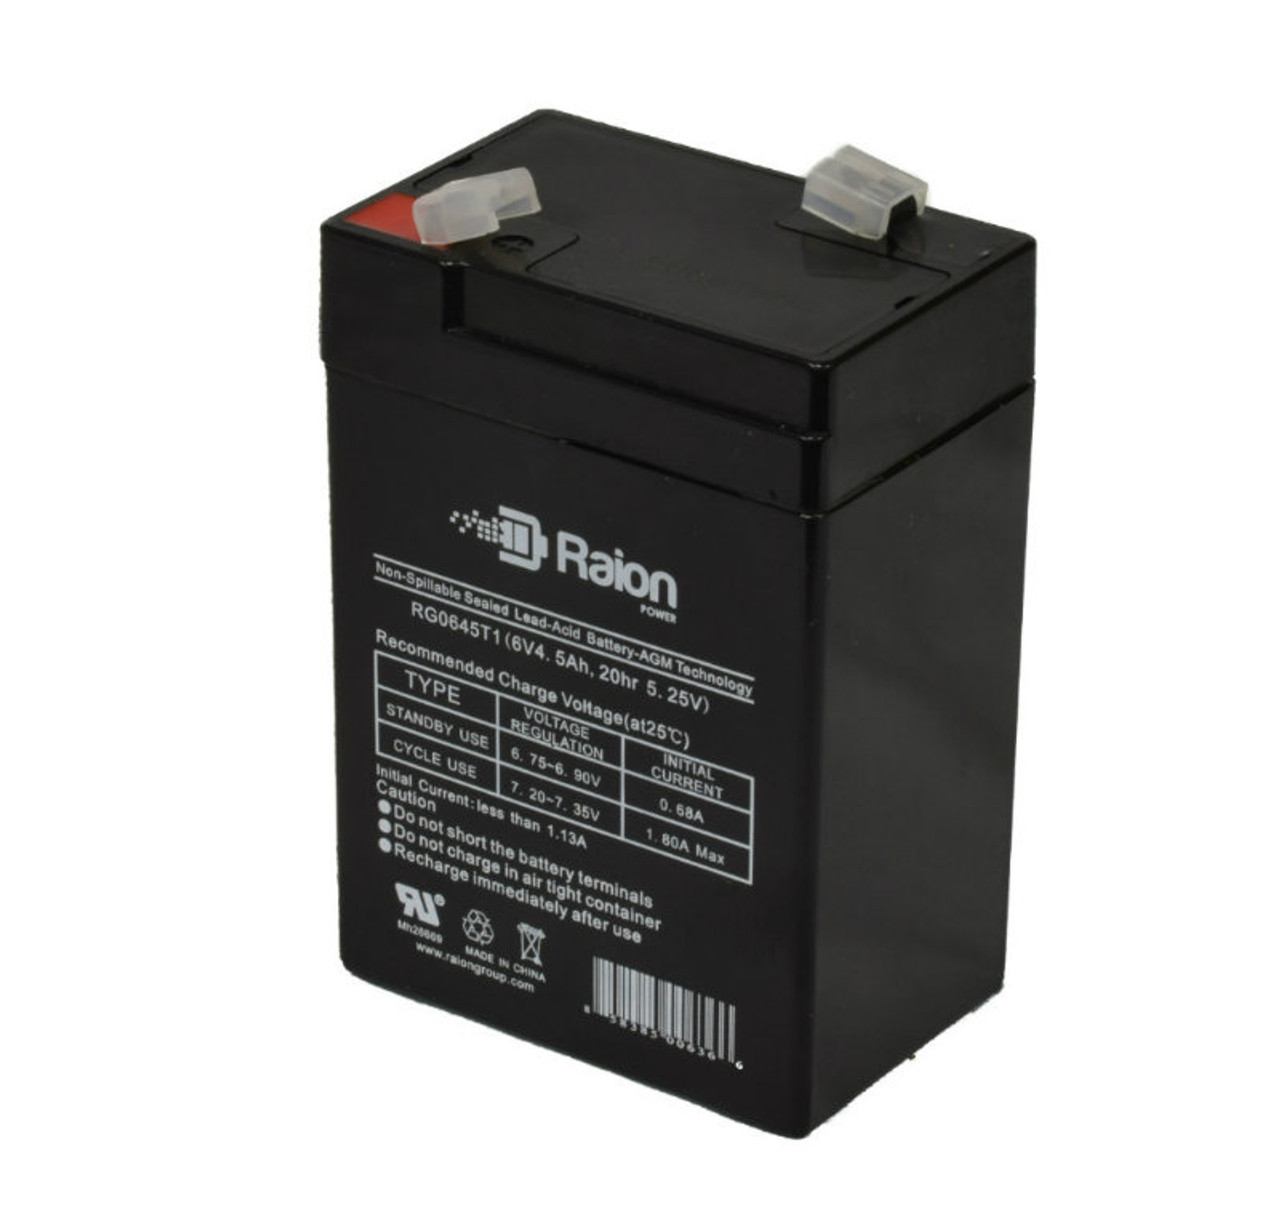 Raion Power RG0645T1 6V 4.5Ah Replacement Ride-On Toy Battery for TOBBI 12V Ride On Audi TT RS Licensed Toy Racing Car